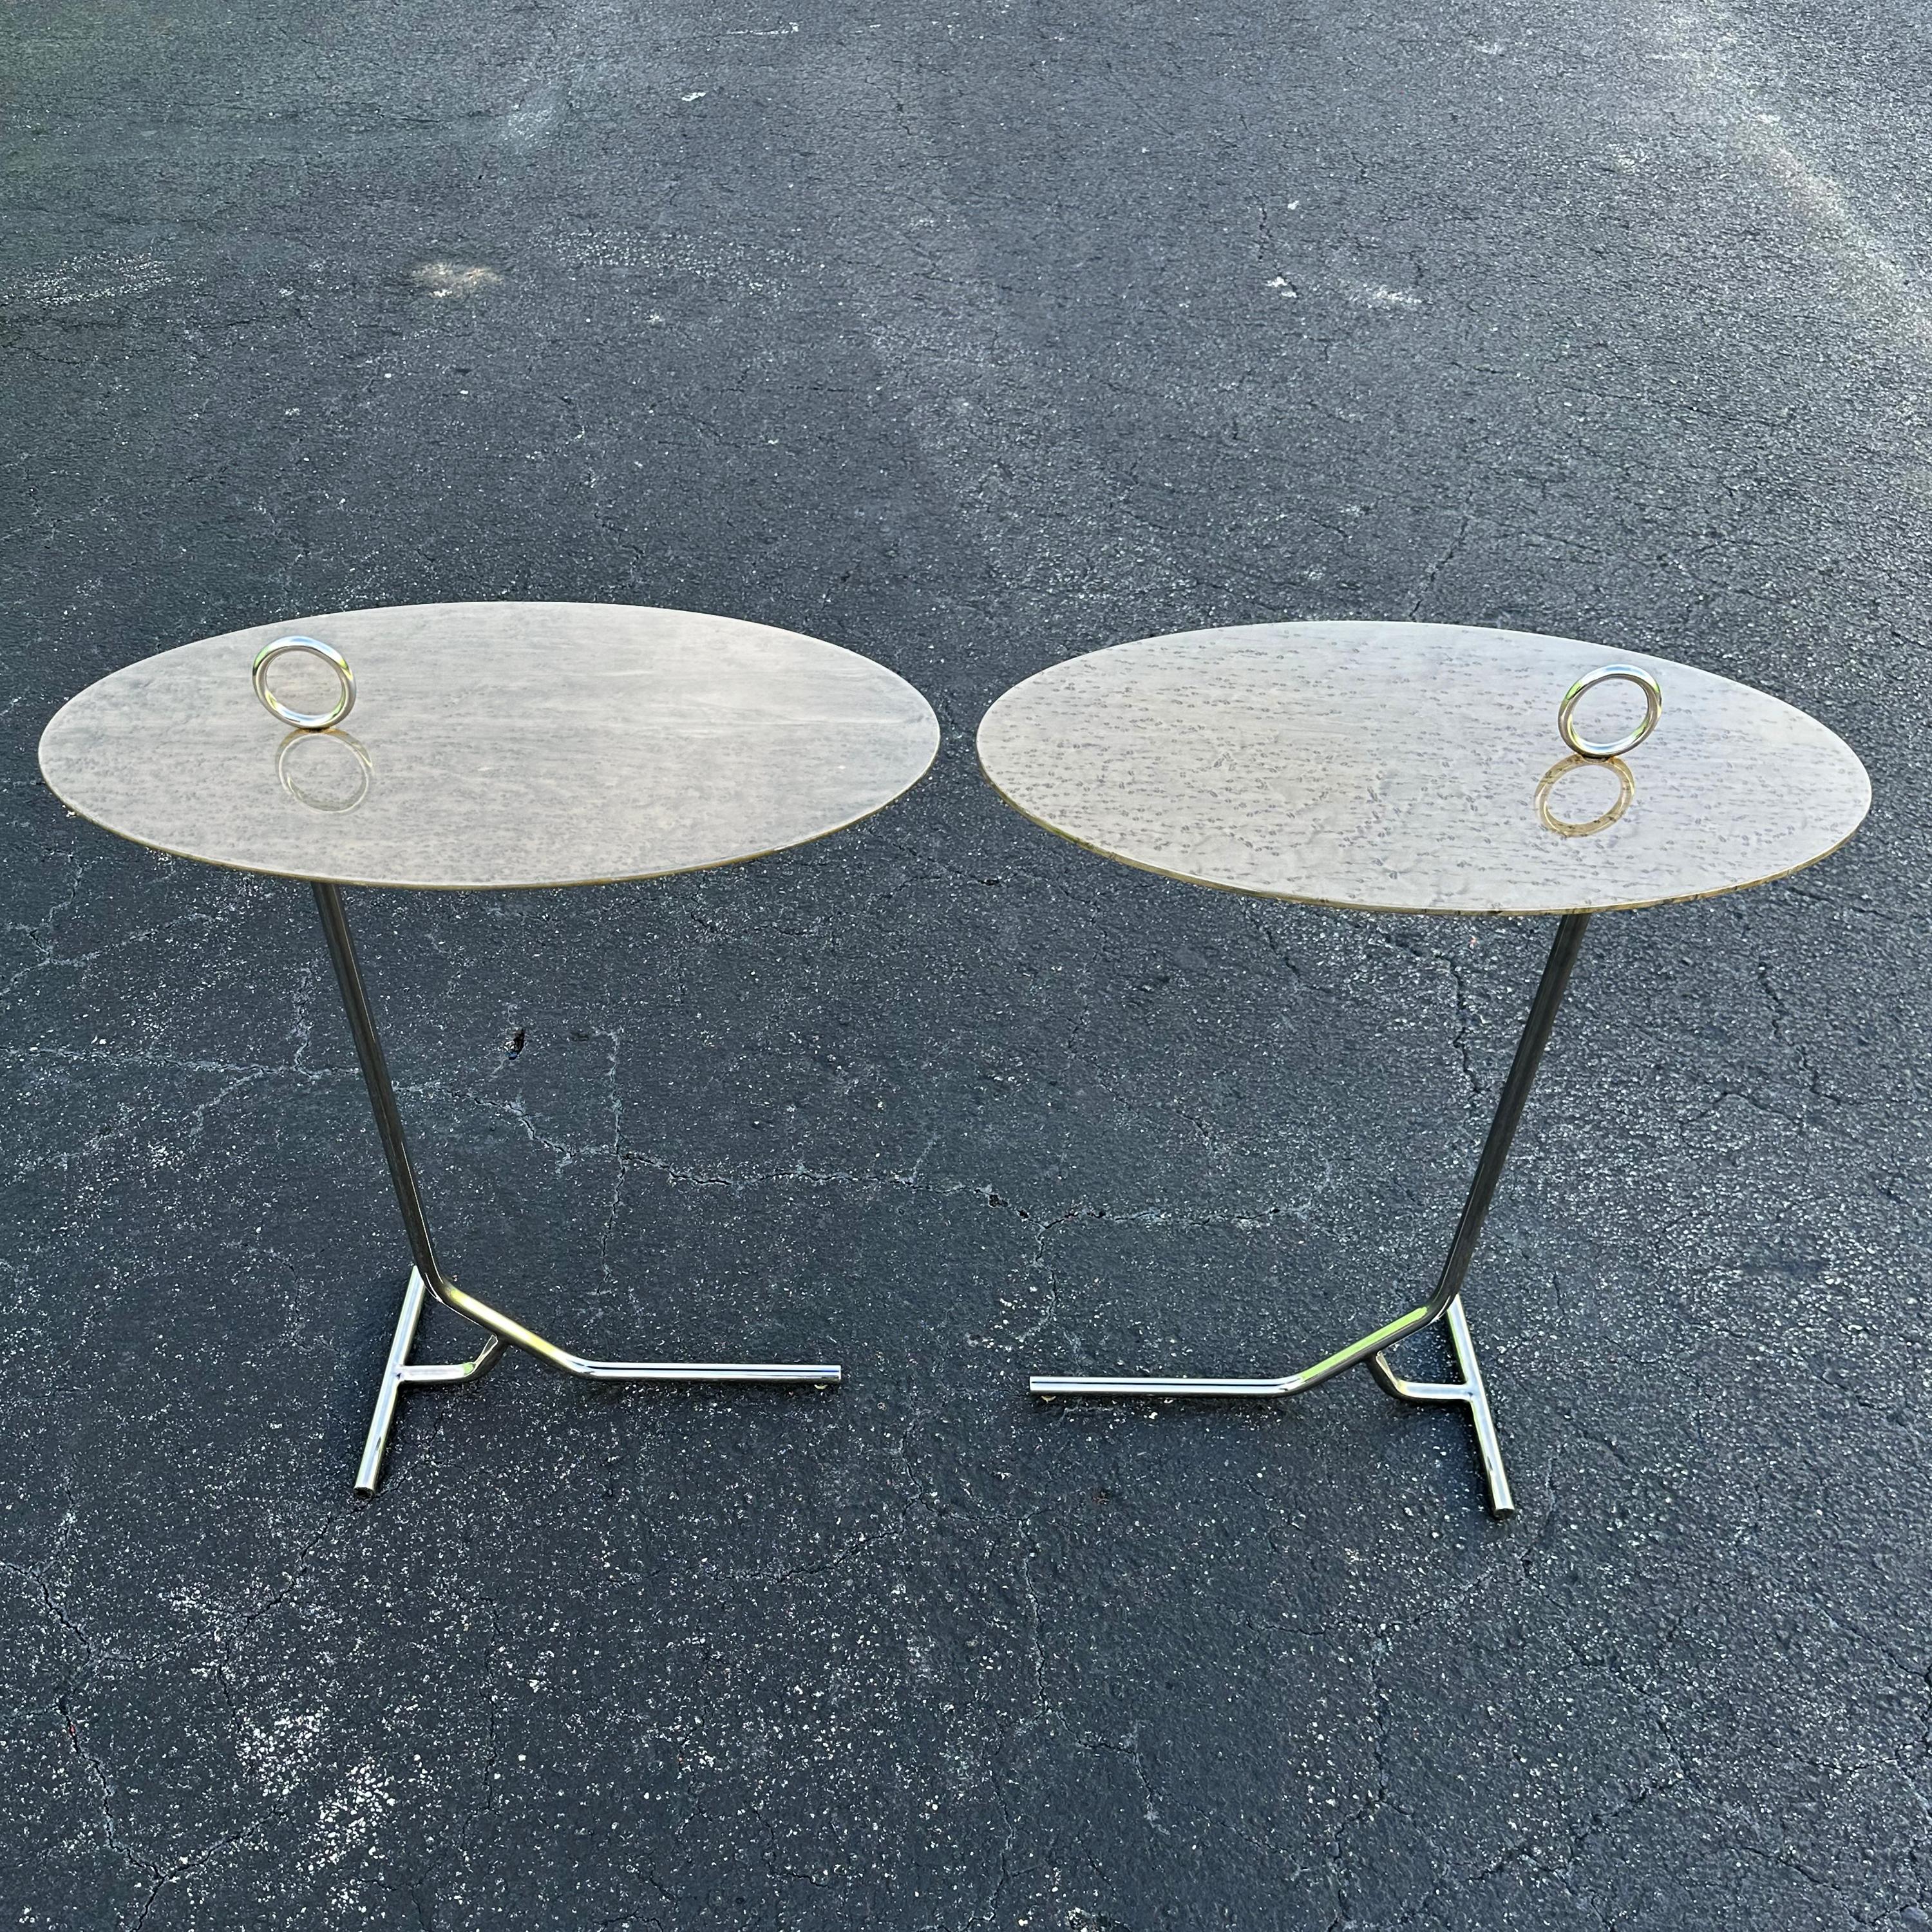 American Post-Modern Cantilever Side Tables by Interlude Home, Pair For Sale